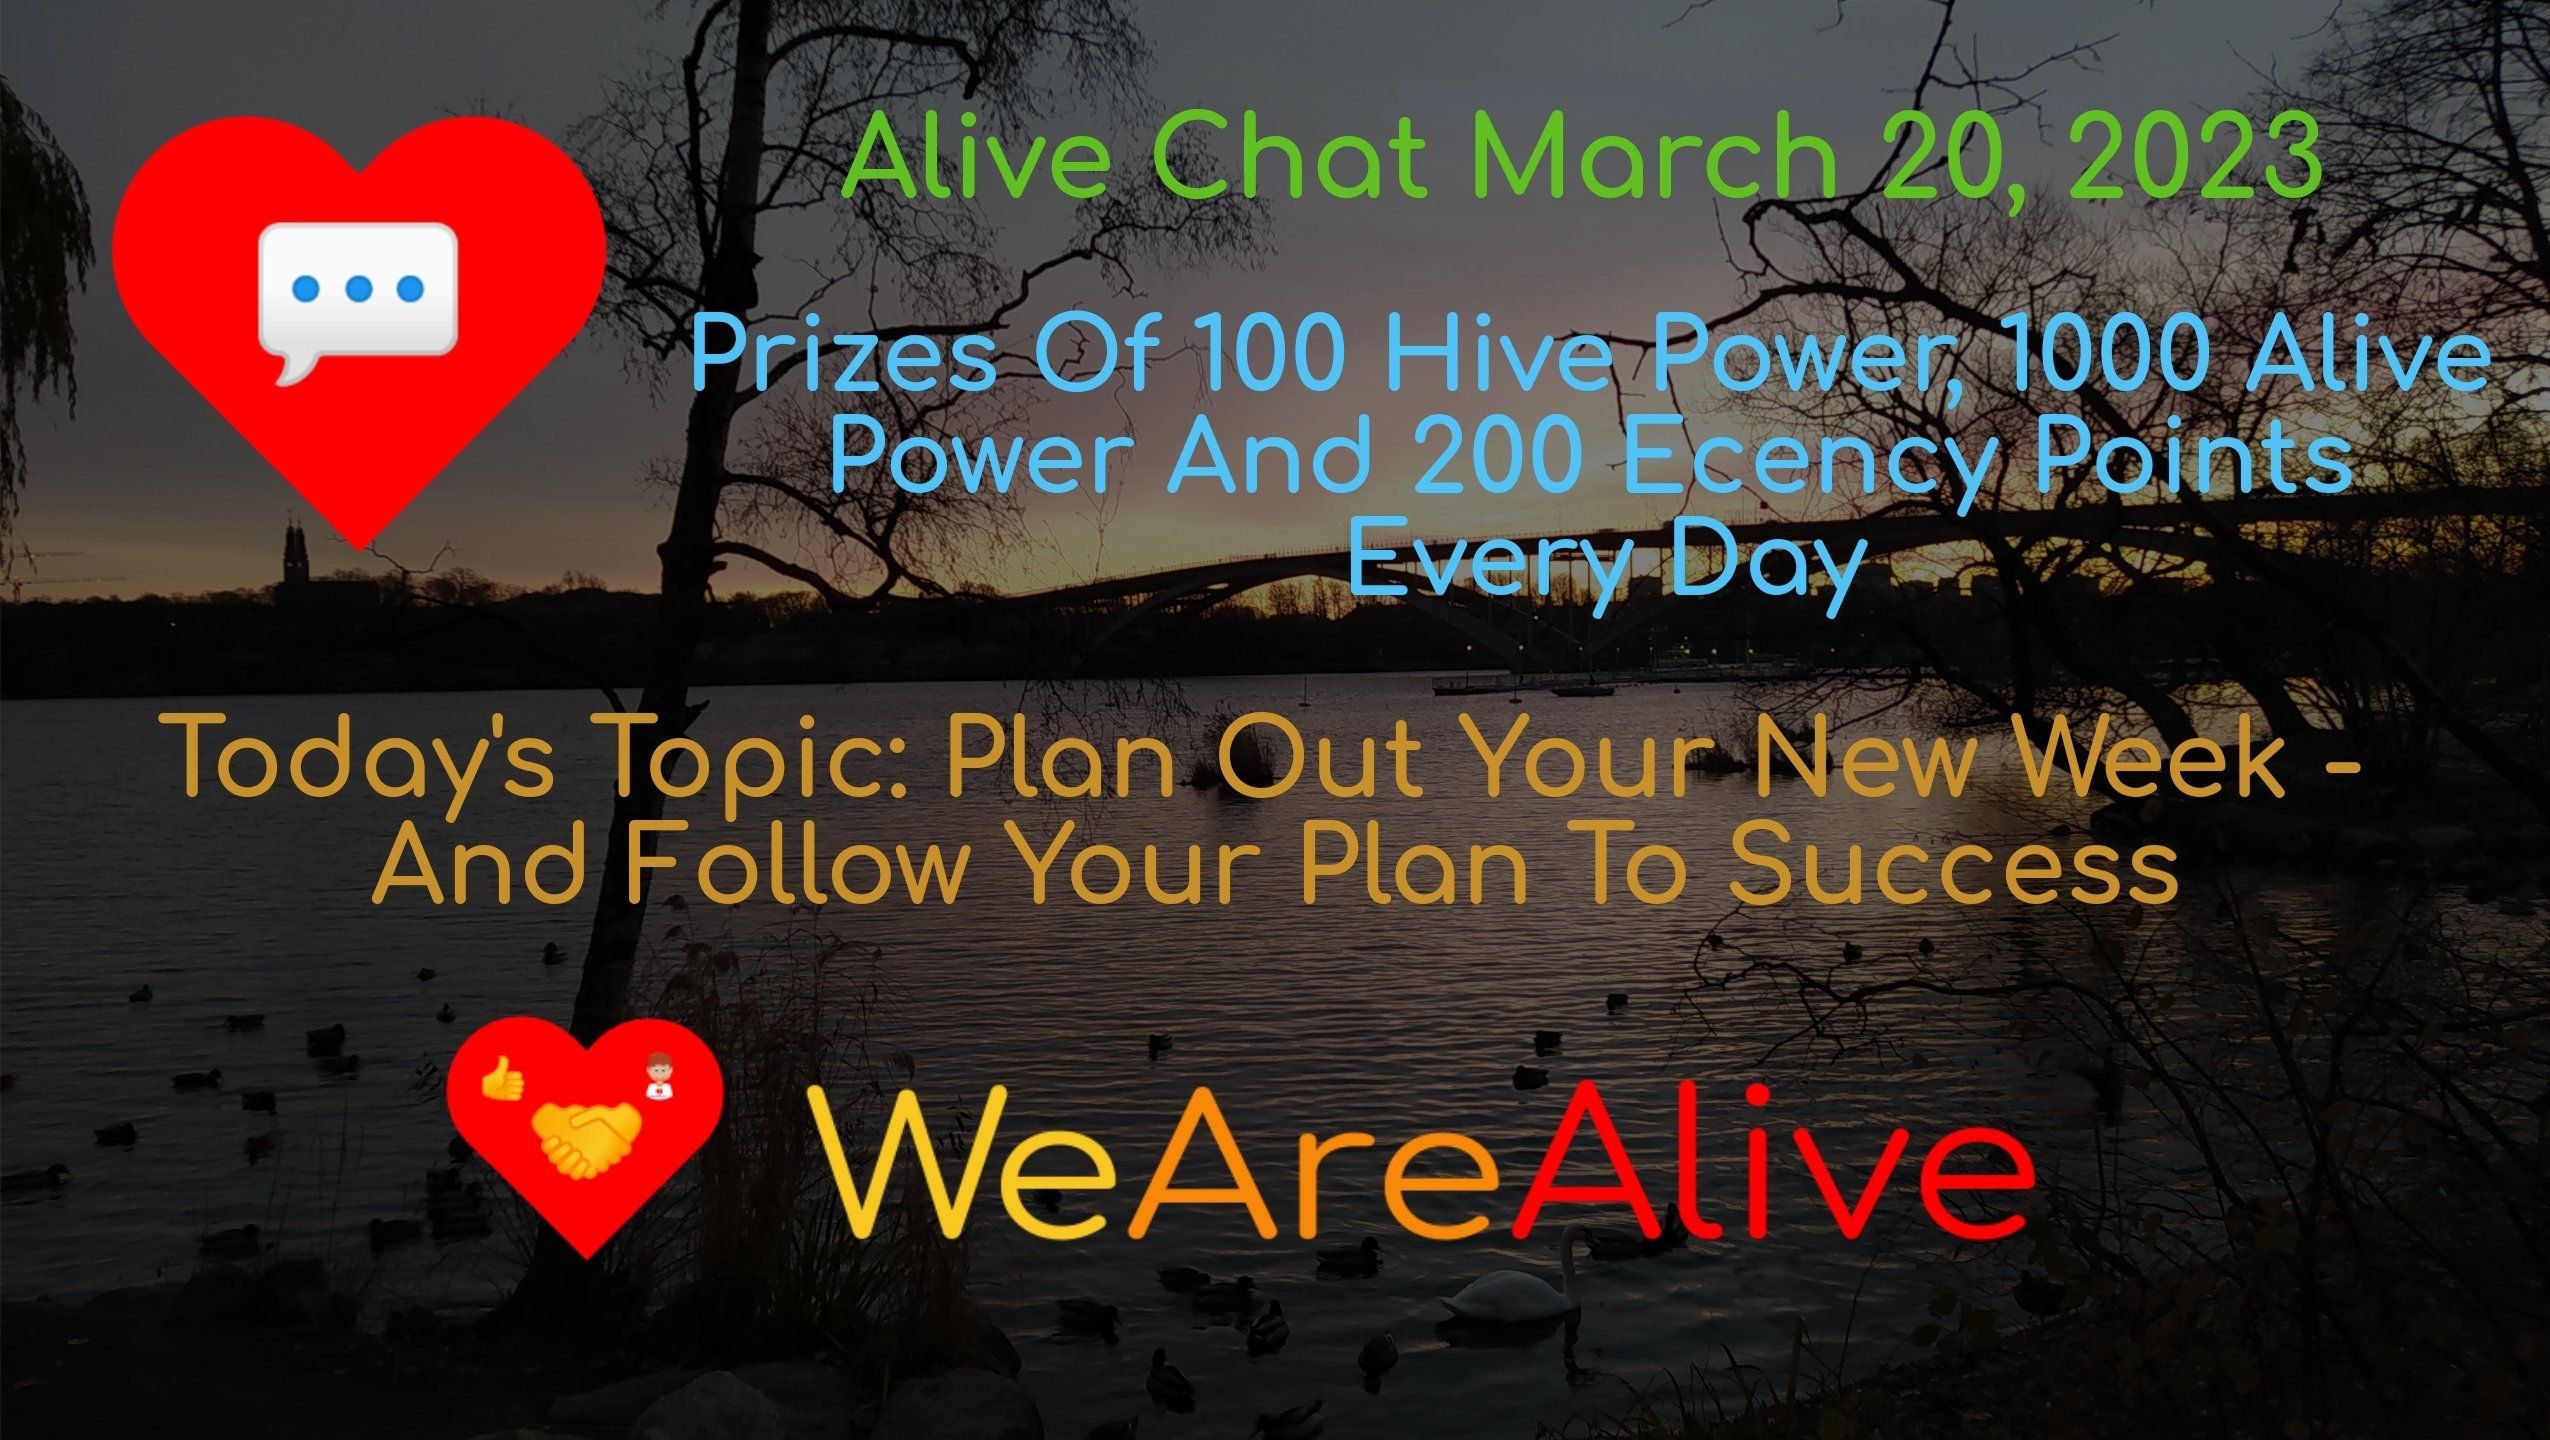 @alive.chat/alive-chat-march-20-2023